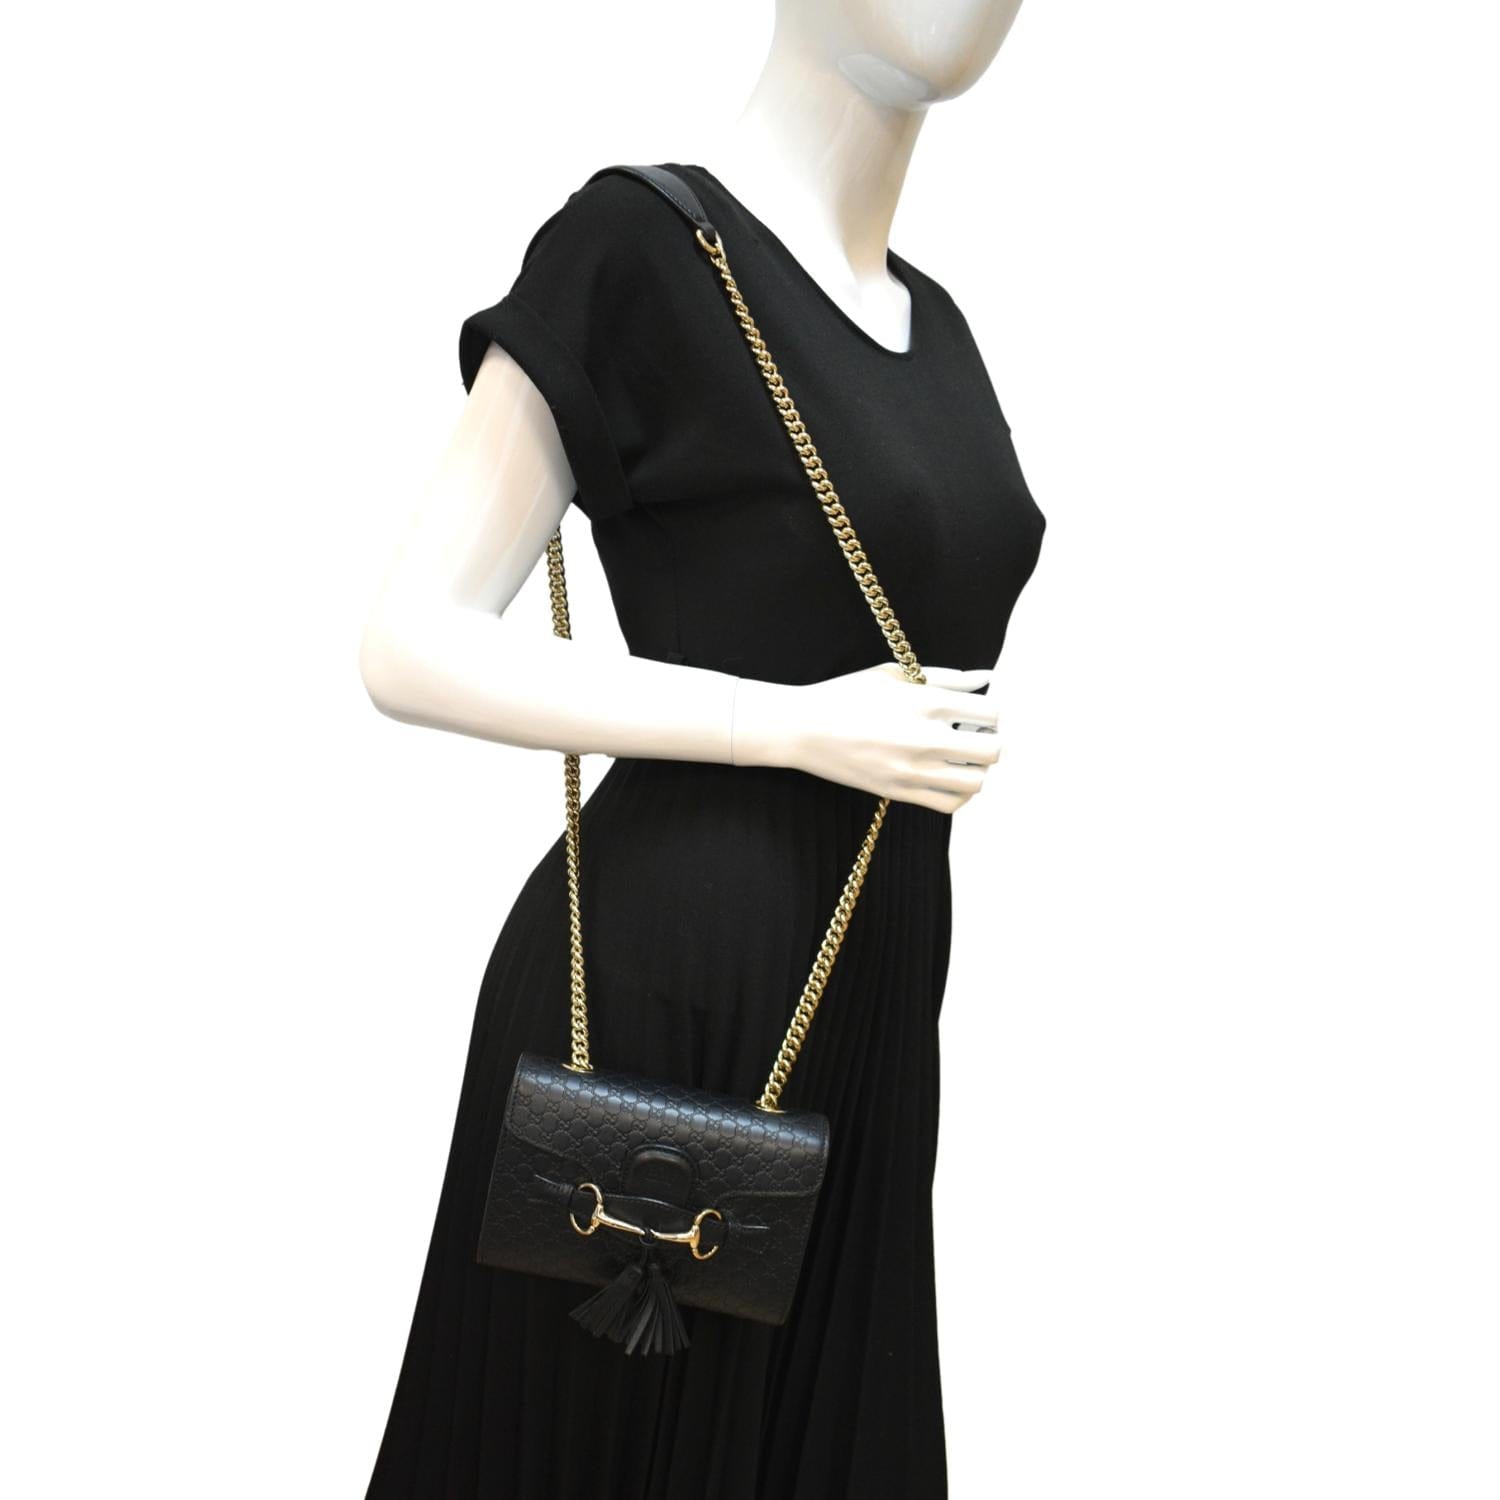 How to Style a Mini Black Shoulder Bag